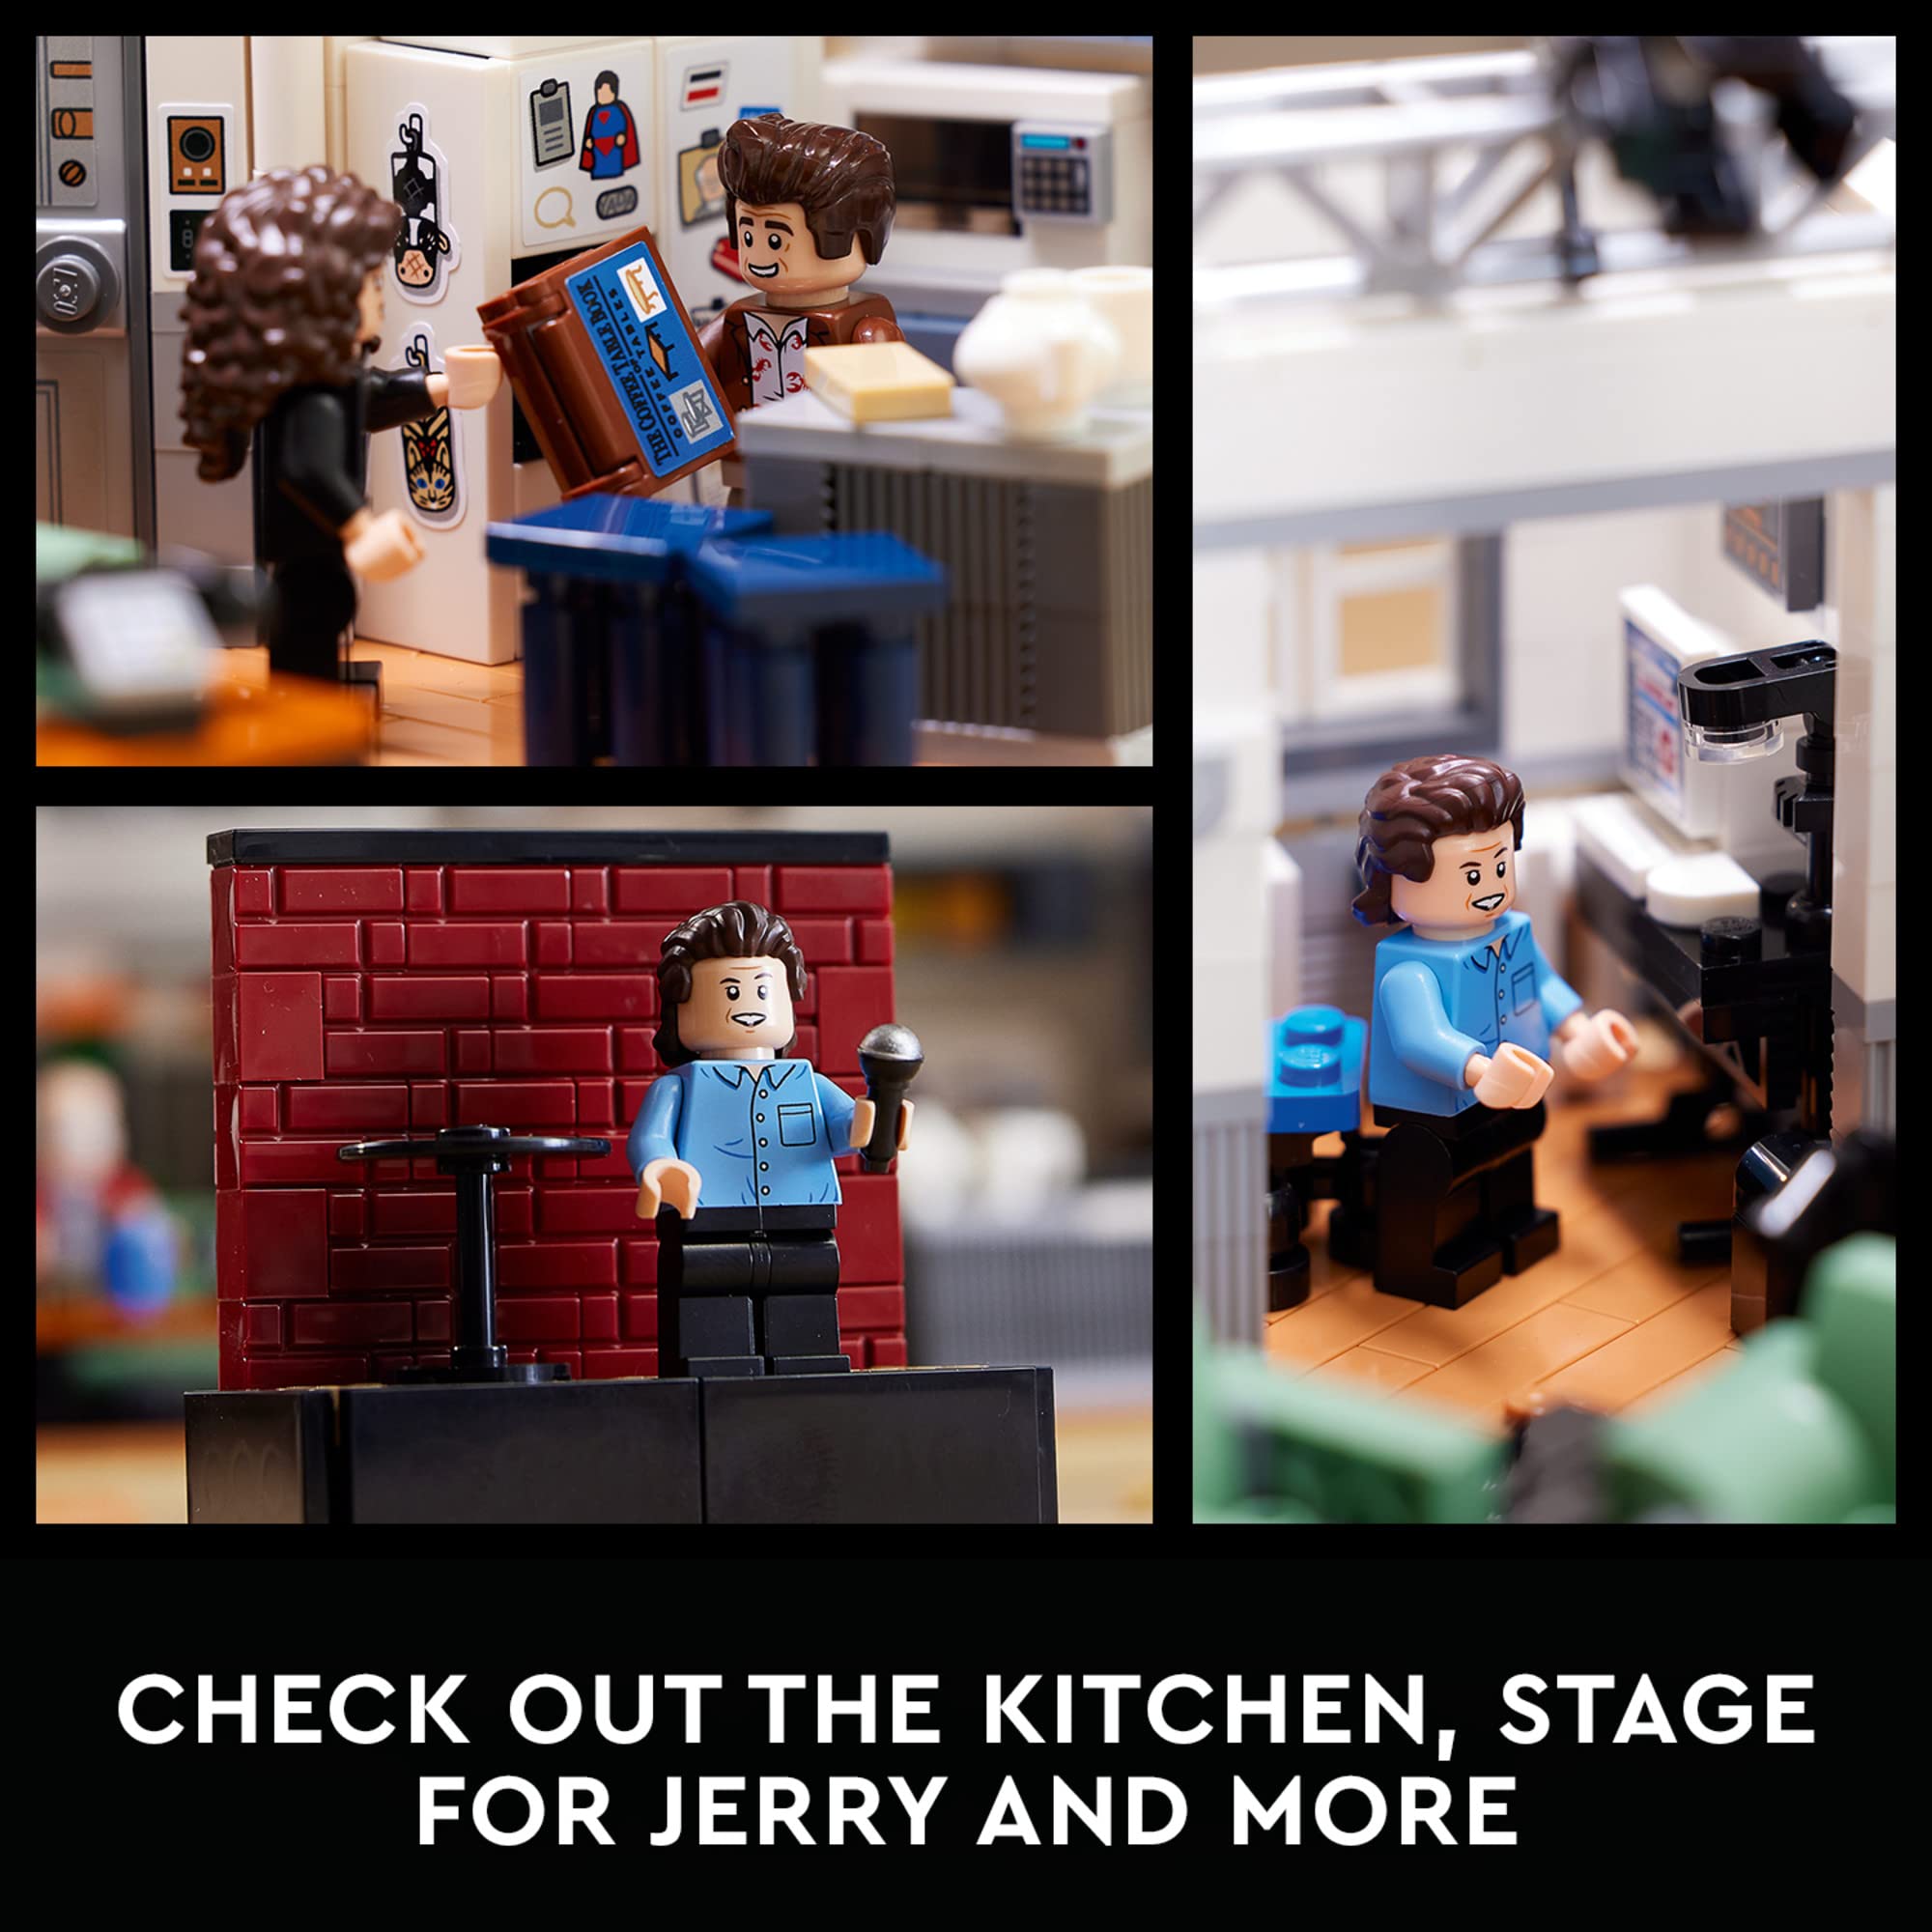 LEGO Ideas Seinfeld 21328 Building Kit; Collectible Display Model; Delightful 1990s Nostalgia Gift for Adults (1,326 Pieces)